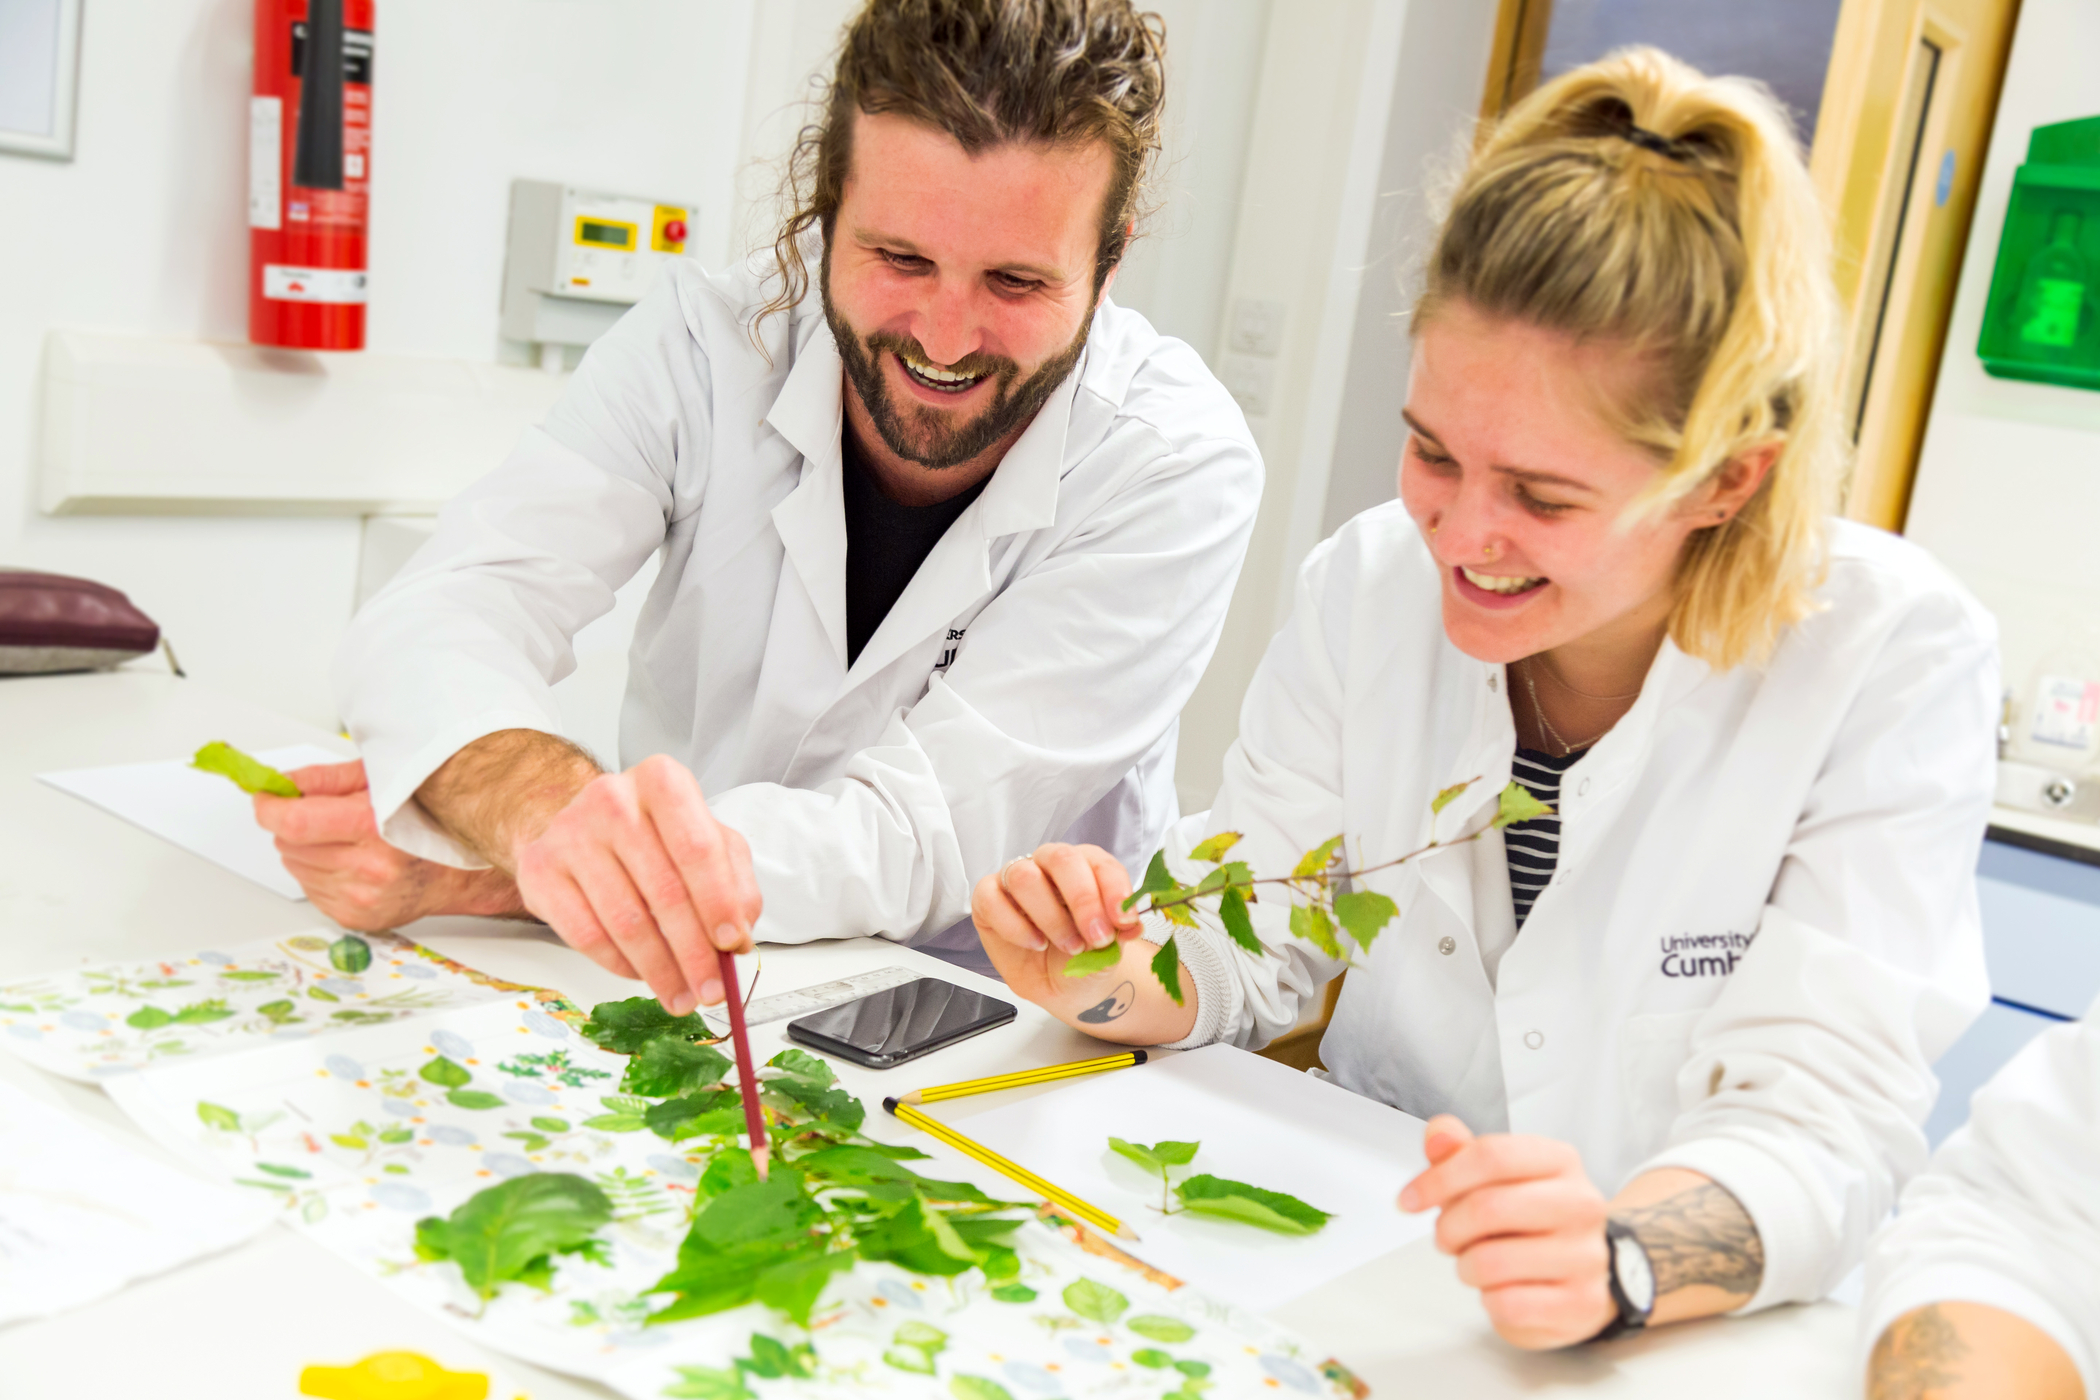 BSc (Hons) Environmental Science with Integrated Foundation Year